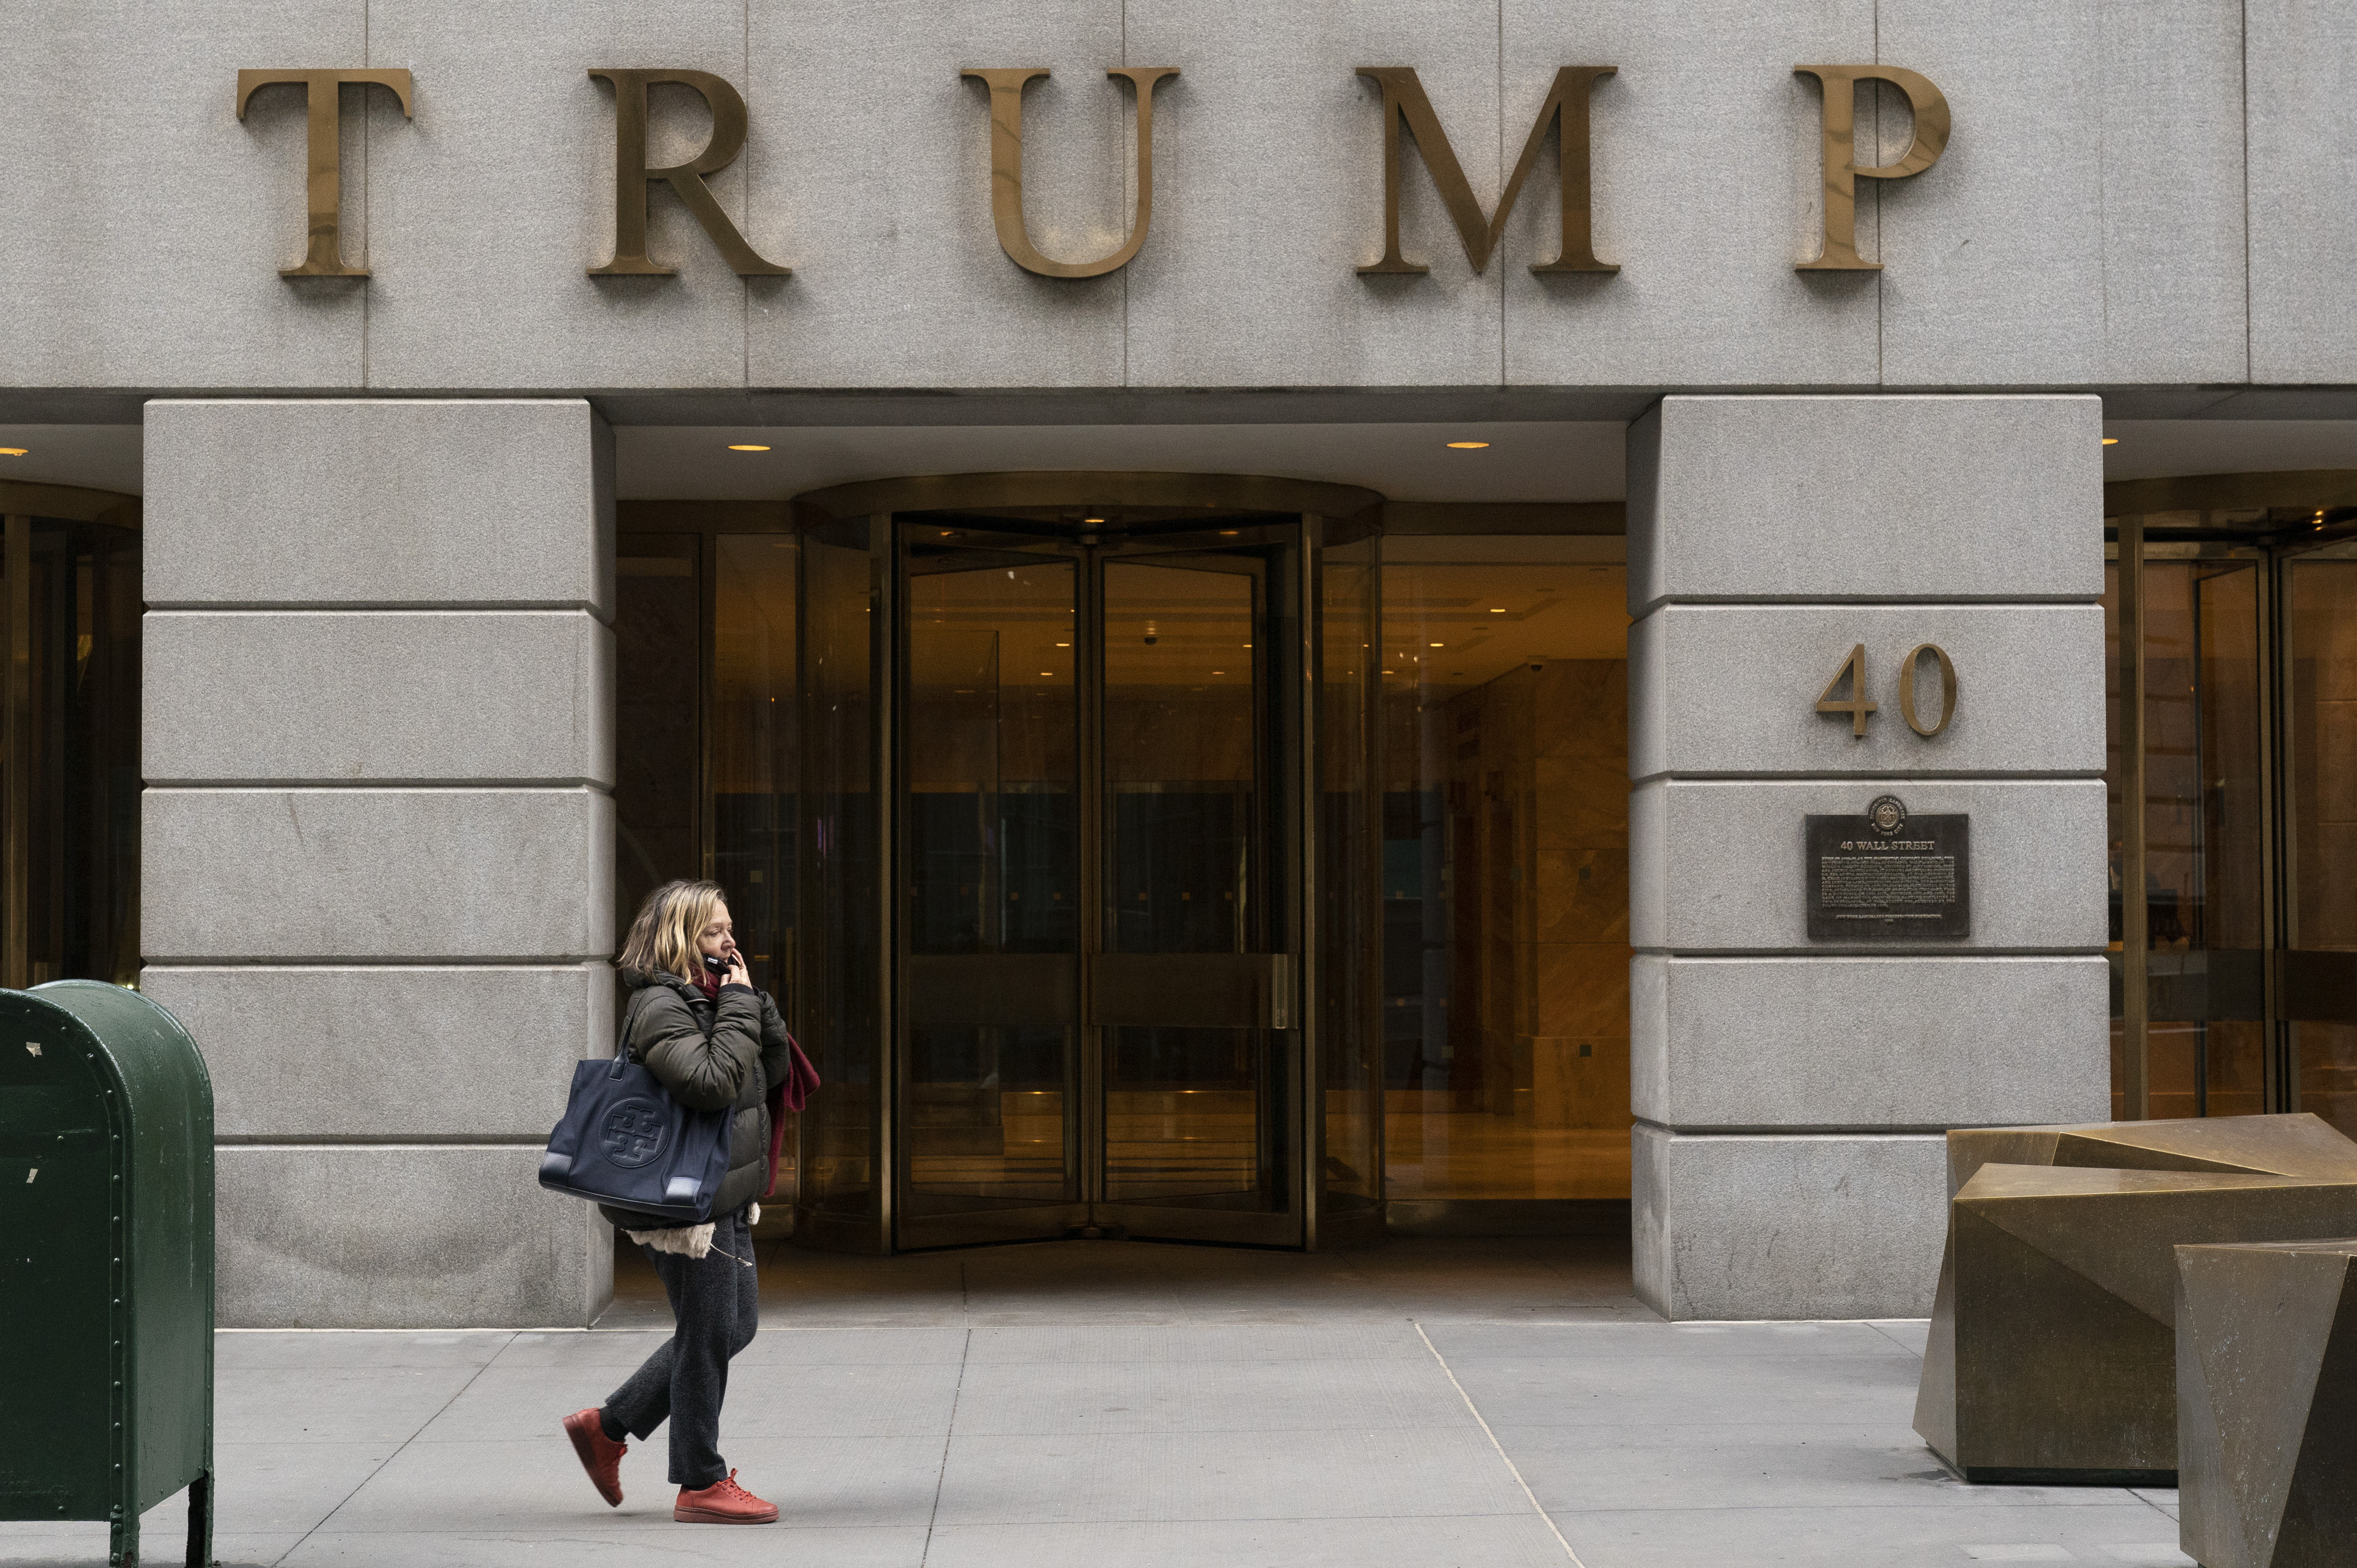 FILE - A woman walks past the Trump Building in New York's financial district, Wednesday, Jan. 13, 2021. Mazars USA LLP, the accounting firm that prepared former President Donald Trumps annual financial statements, says the documents should no longer be relied upon after investigators said they found evidence he and his company regularly misstated the value of assets. (AP Photo/Mark Lennihan, File)